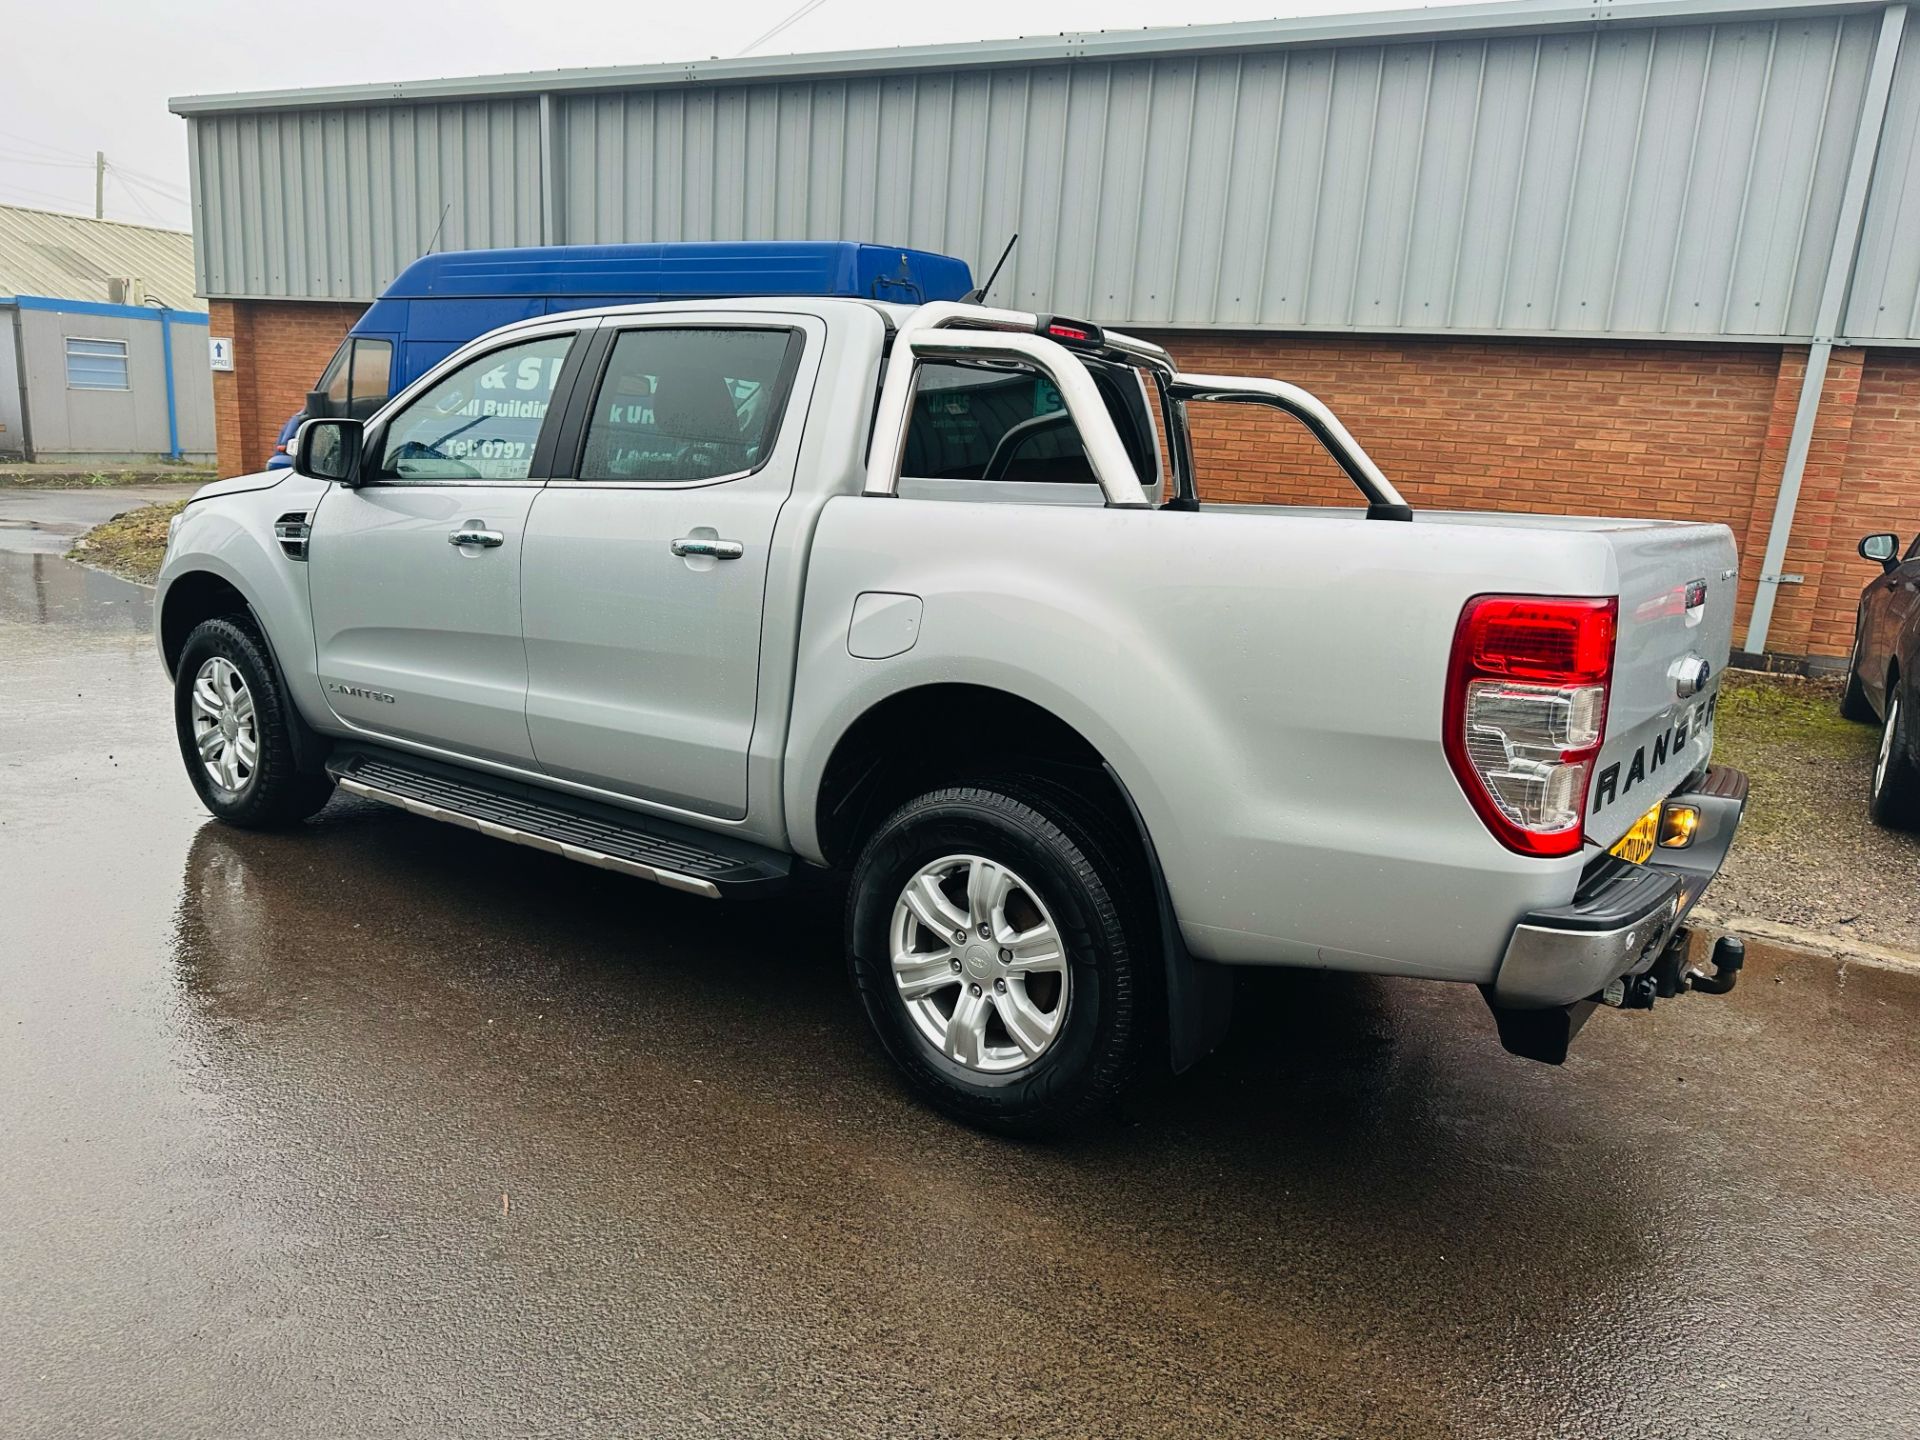 Ford Ranger 2.0 TDCI LIMITED 170BHP Auto SS (2021 Model) Huge Spec -Sat Nav Leather 35k Miles Only - Image 8 of 44